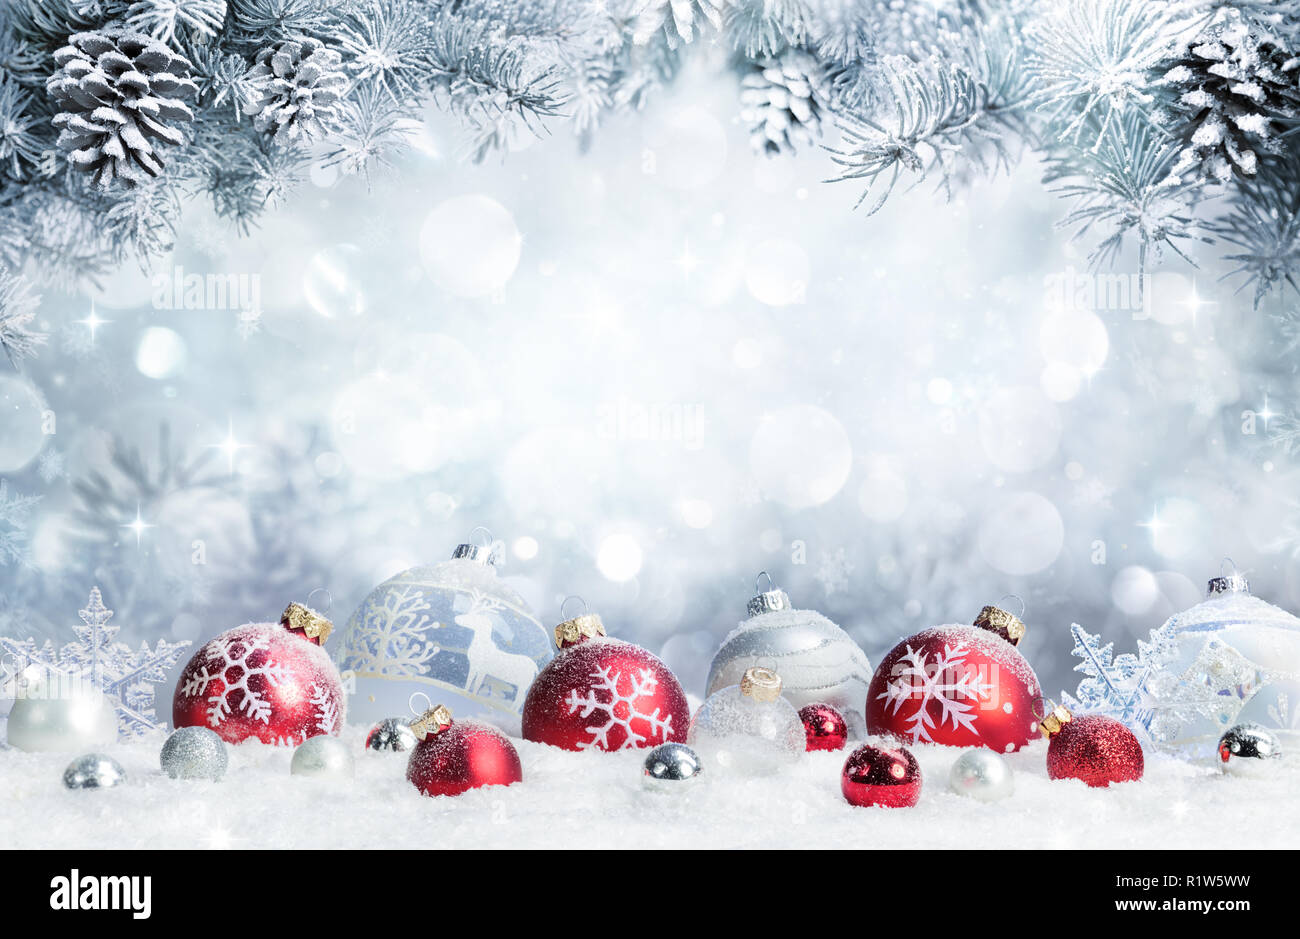 Merry Christmas - Baubles On Snow With Fir Branches Stock Photo